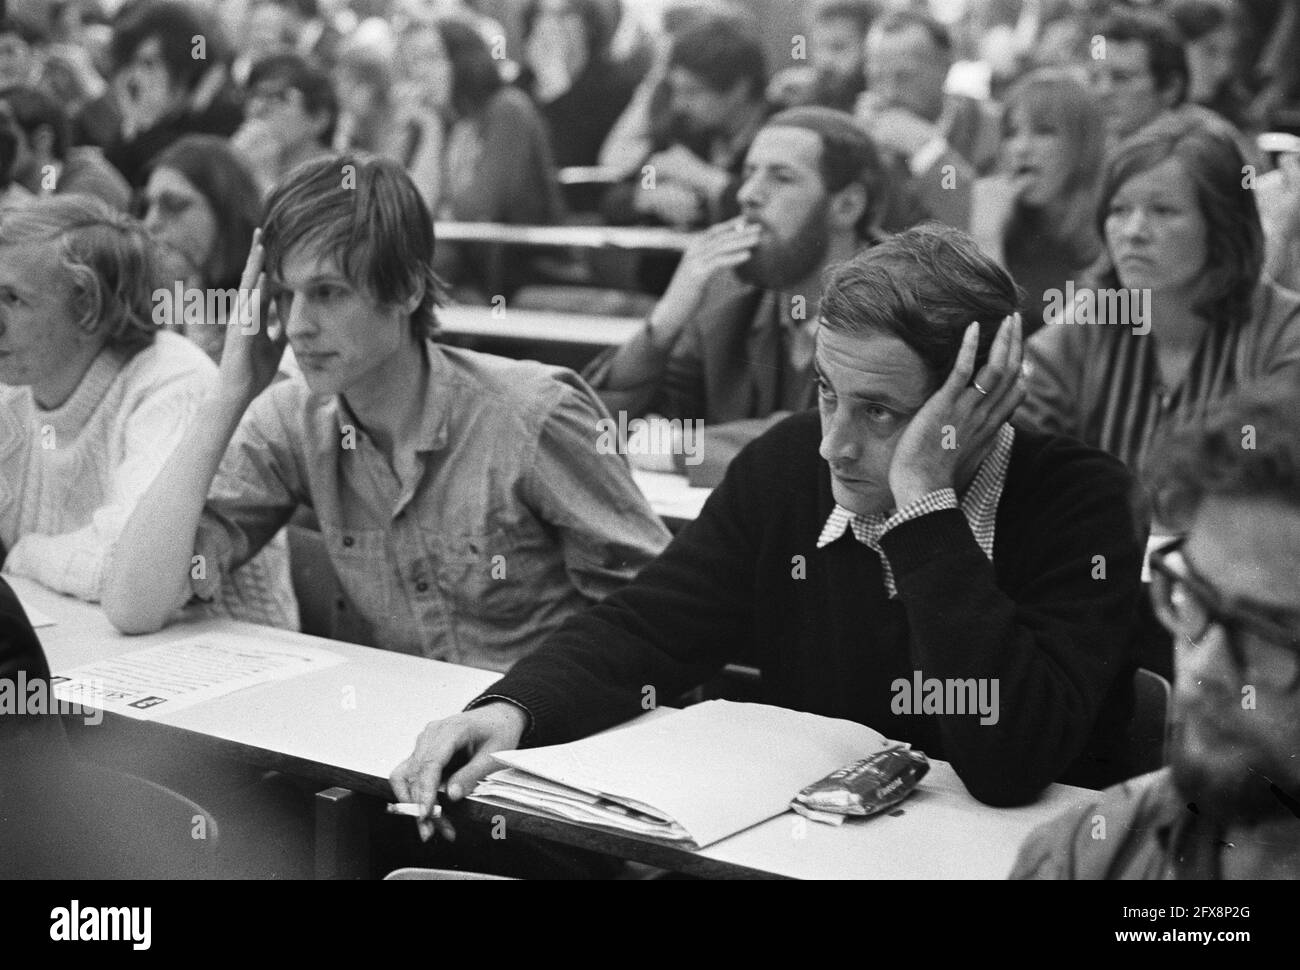 Occupiers Maagdenhuis meeting in Oudemanhuispoort, Amsterdam about upcoming trials Ton Regtien in the hall, 9 June 1969, trials, halls, The Netherlands, 20th century press agency photo, news to remember, documentary, historic photography 1945-1990, visual stories, human history of the Twentieth Century, capturing moments in time Stock Photo